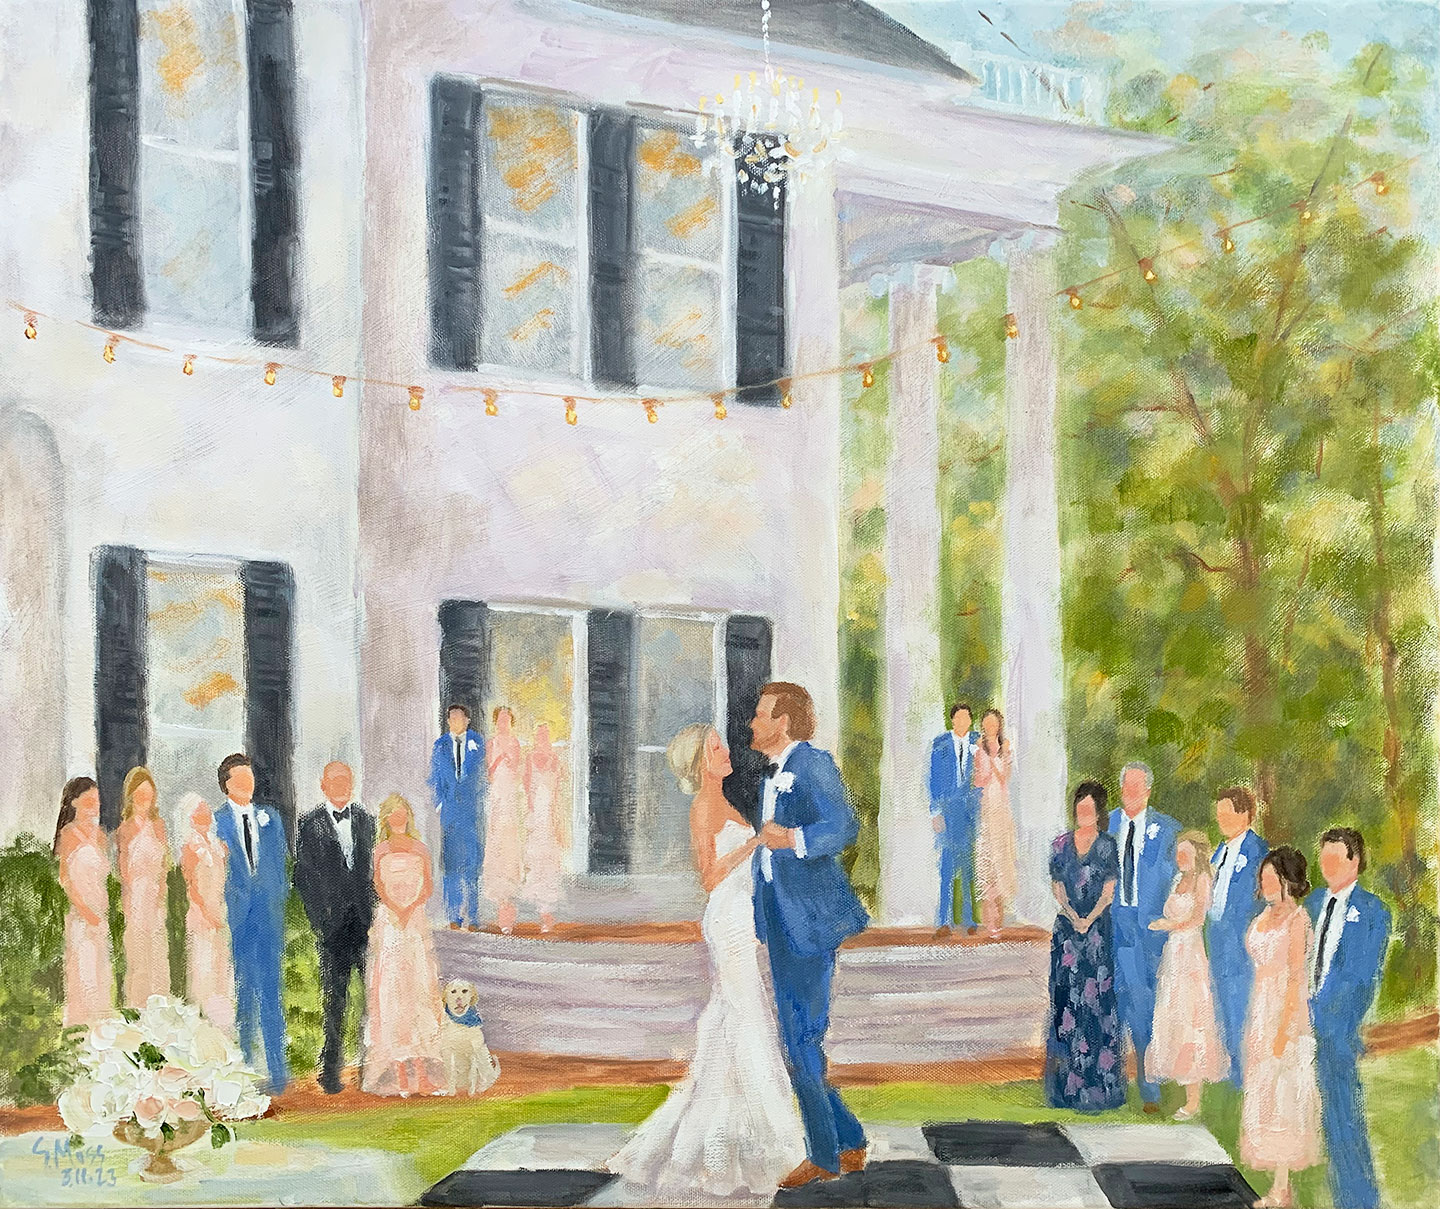 Live Event Wedding Painting of the First Dance by Dallas Artist Susan Moss Cooper.  Georgetown, Texas